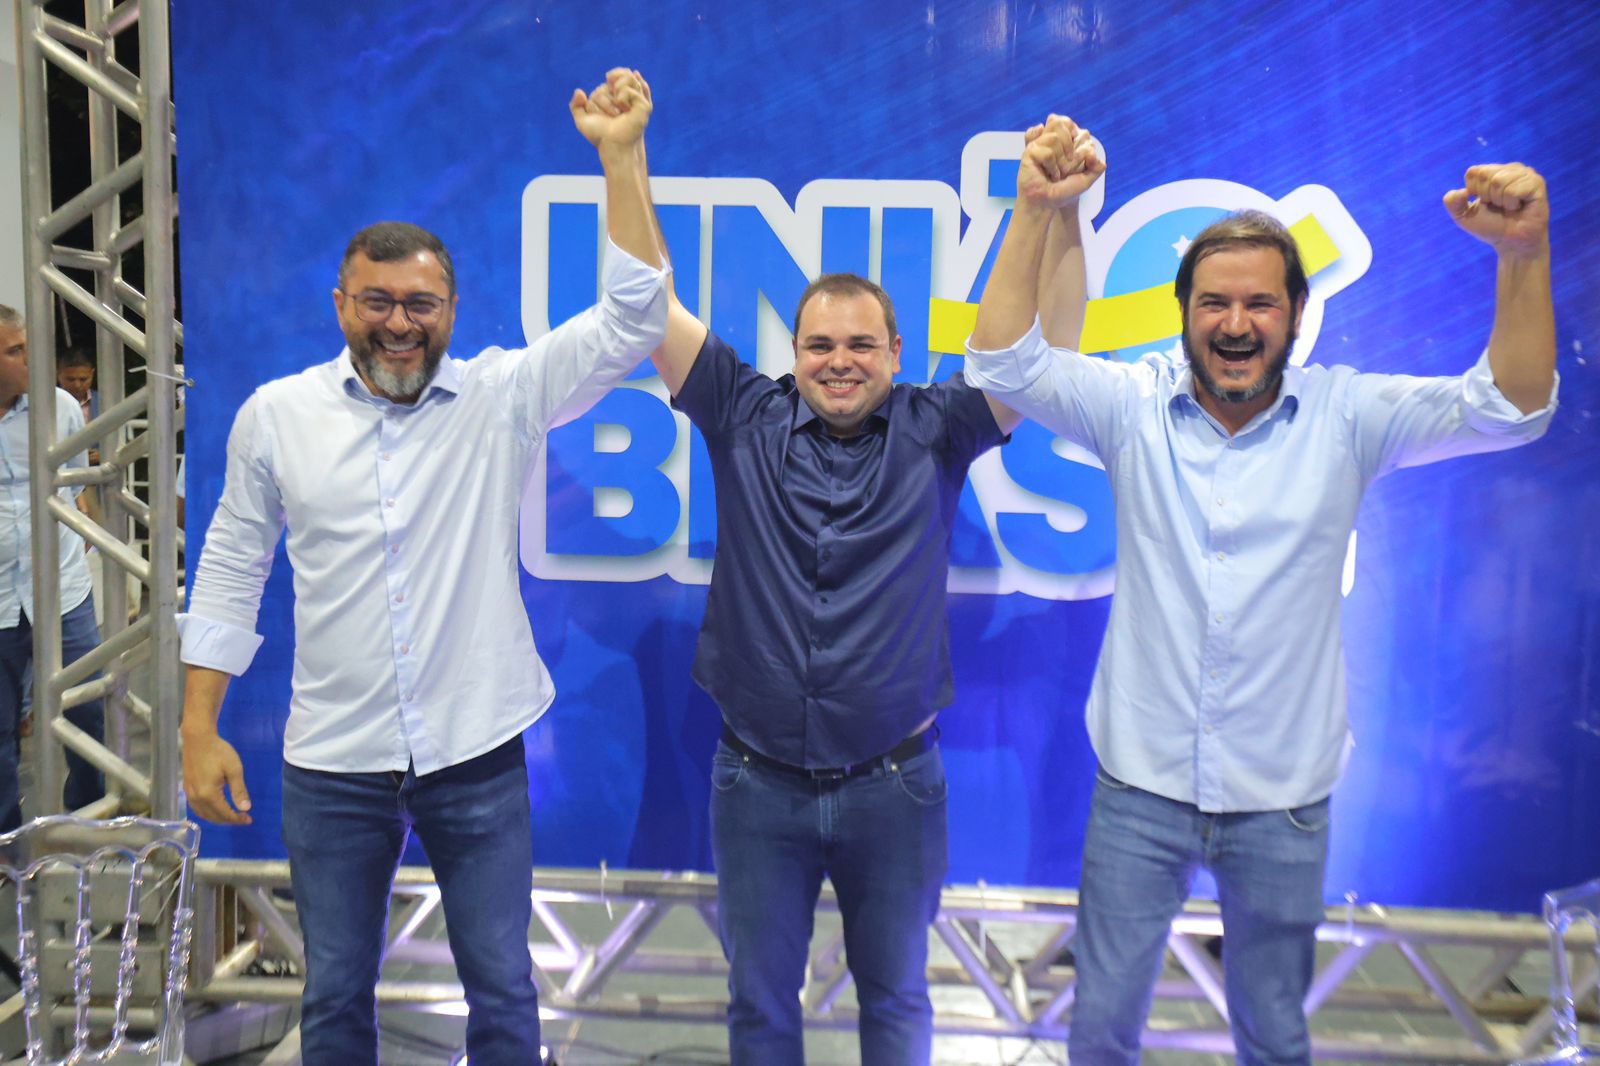 União Brasil launches Roberto Cidade’s pre-candidacy for mayor of Manaus